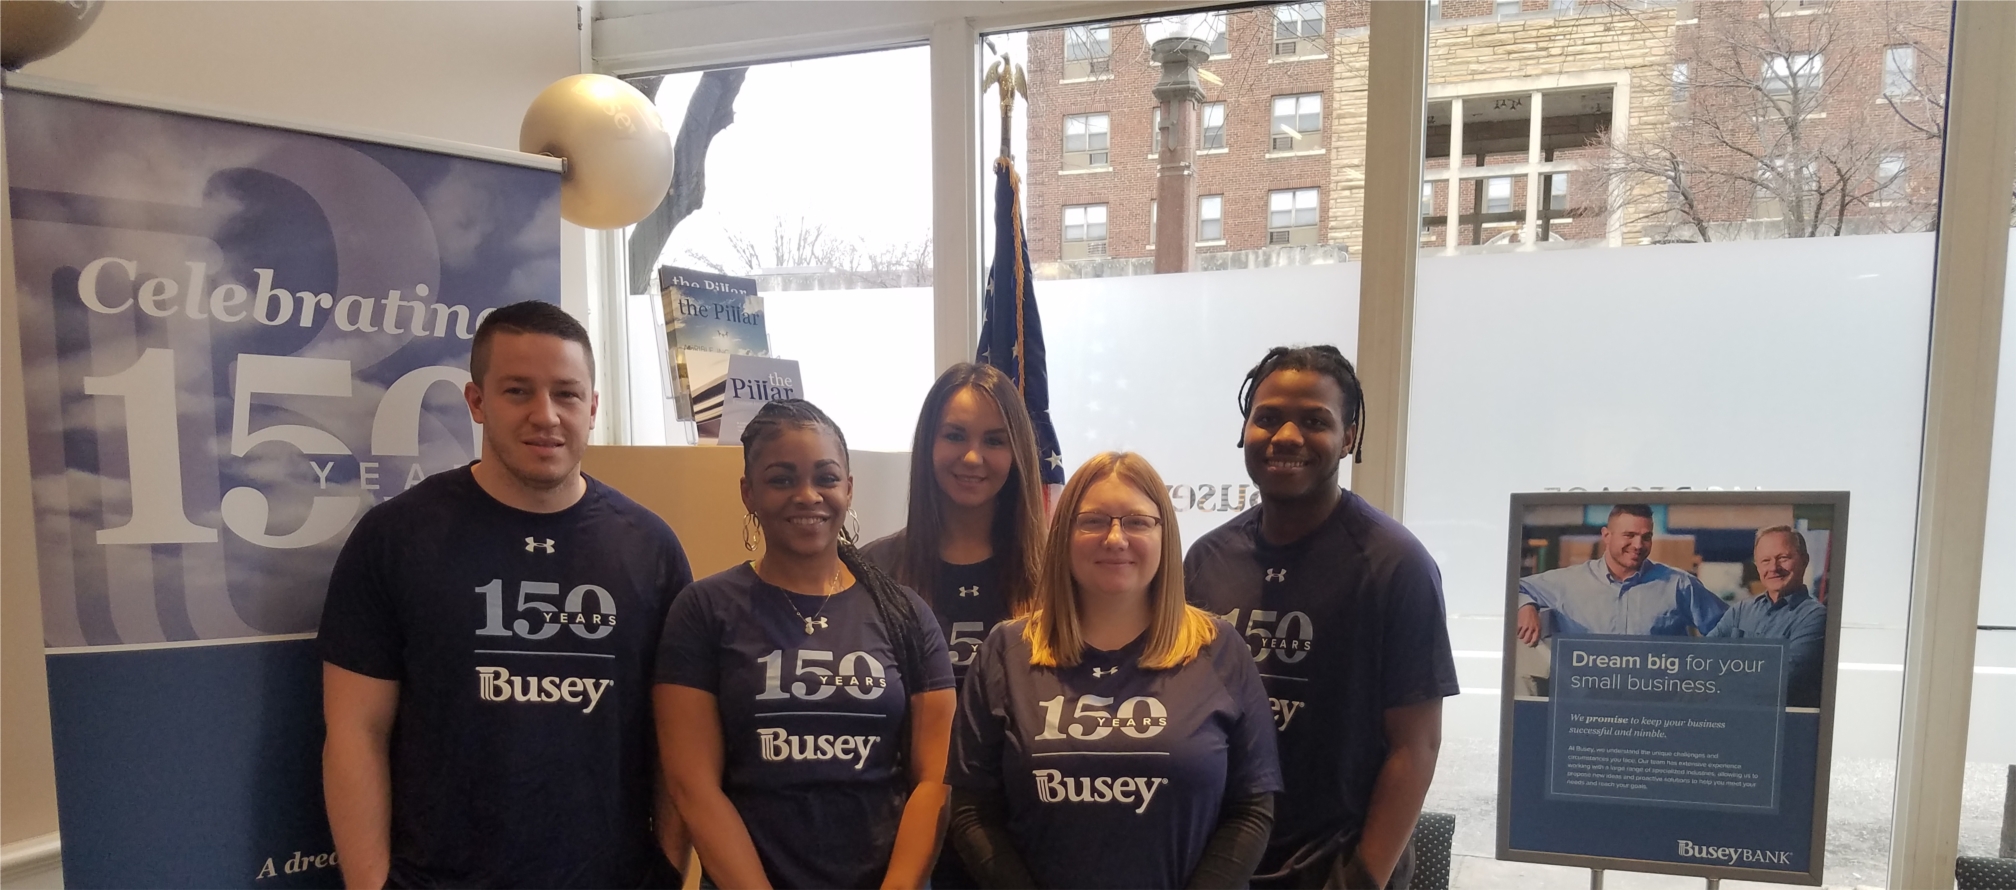 As Busey observes its sesquicentennial, fulfilling dreams since 1868, St. Louis associates celebrate the milestone with customers at our Maryland Plaza location. 